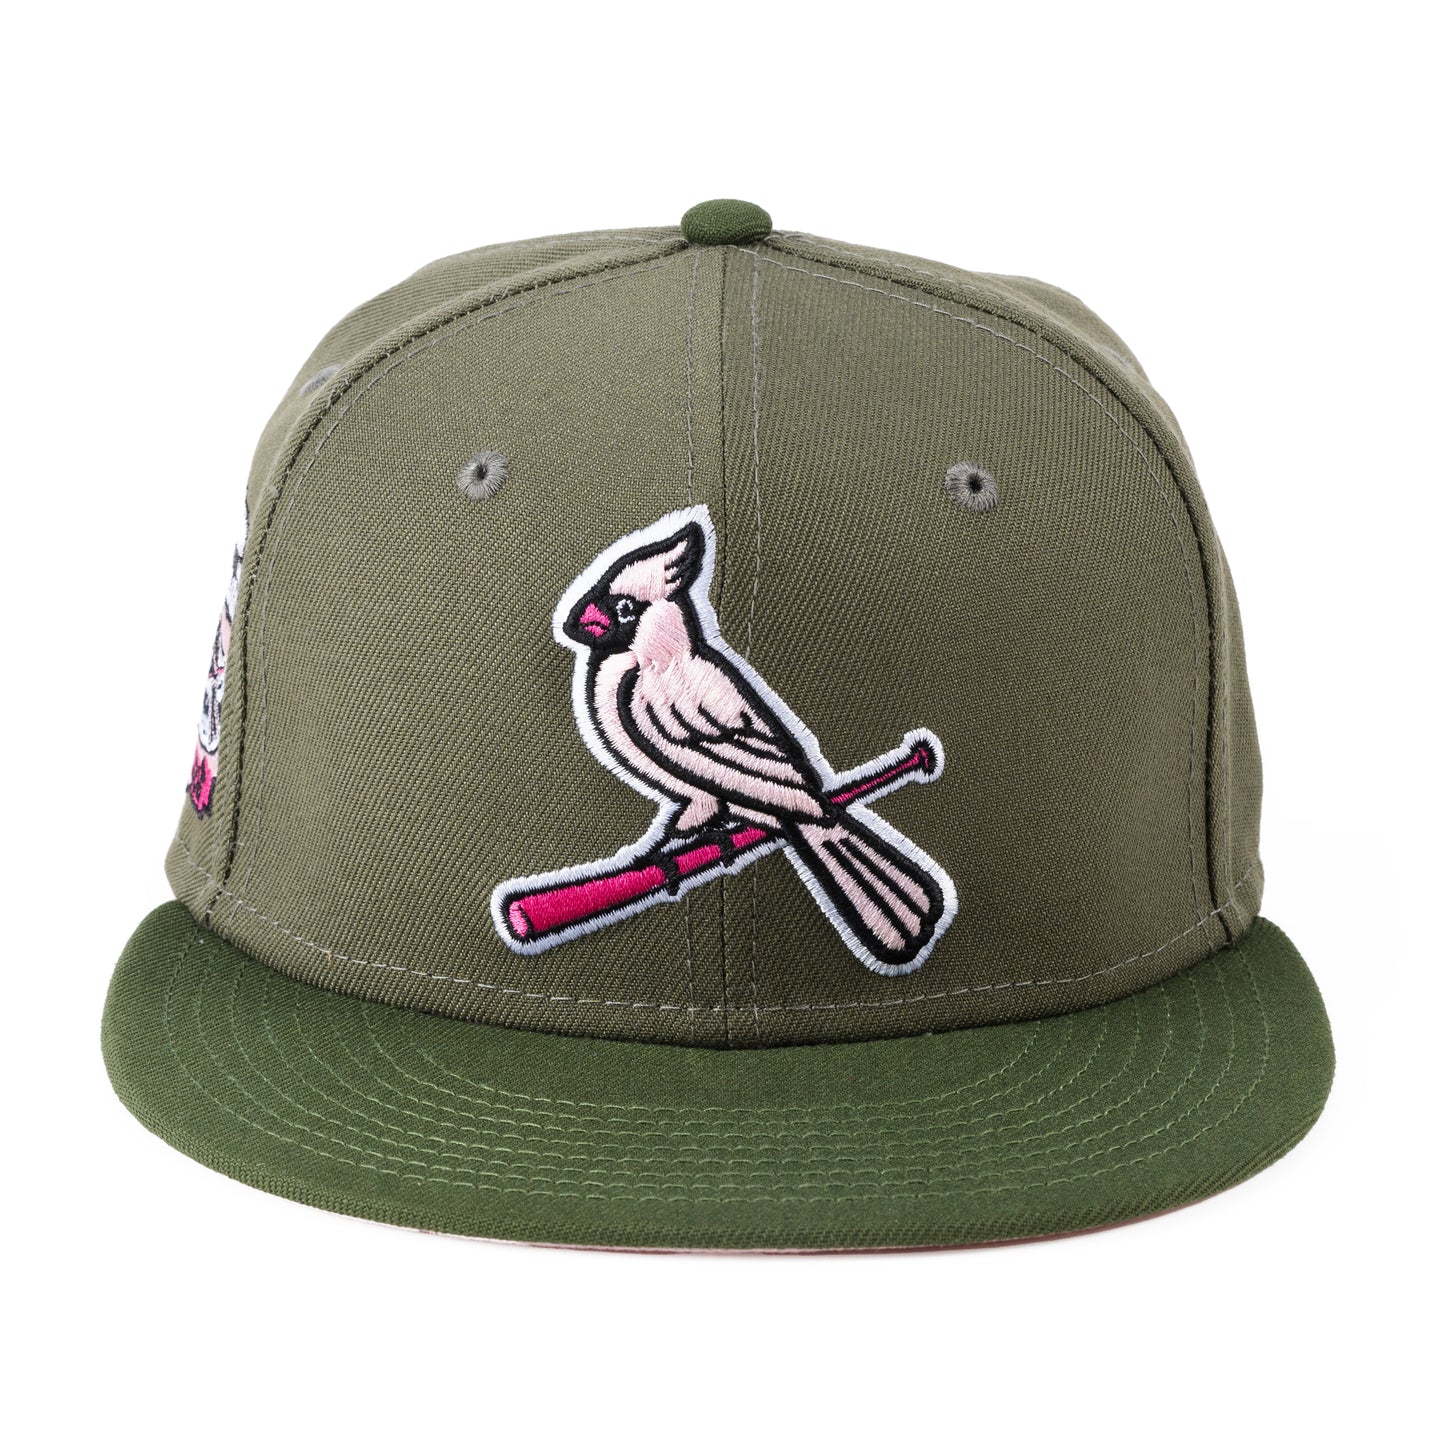 ST.LOUIS CARDINALS "PINK OLIVE PACK" NEW ERA 59FIFTY HAT